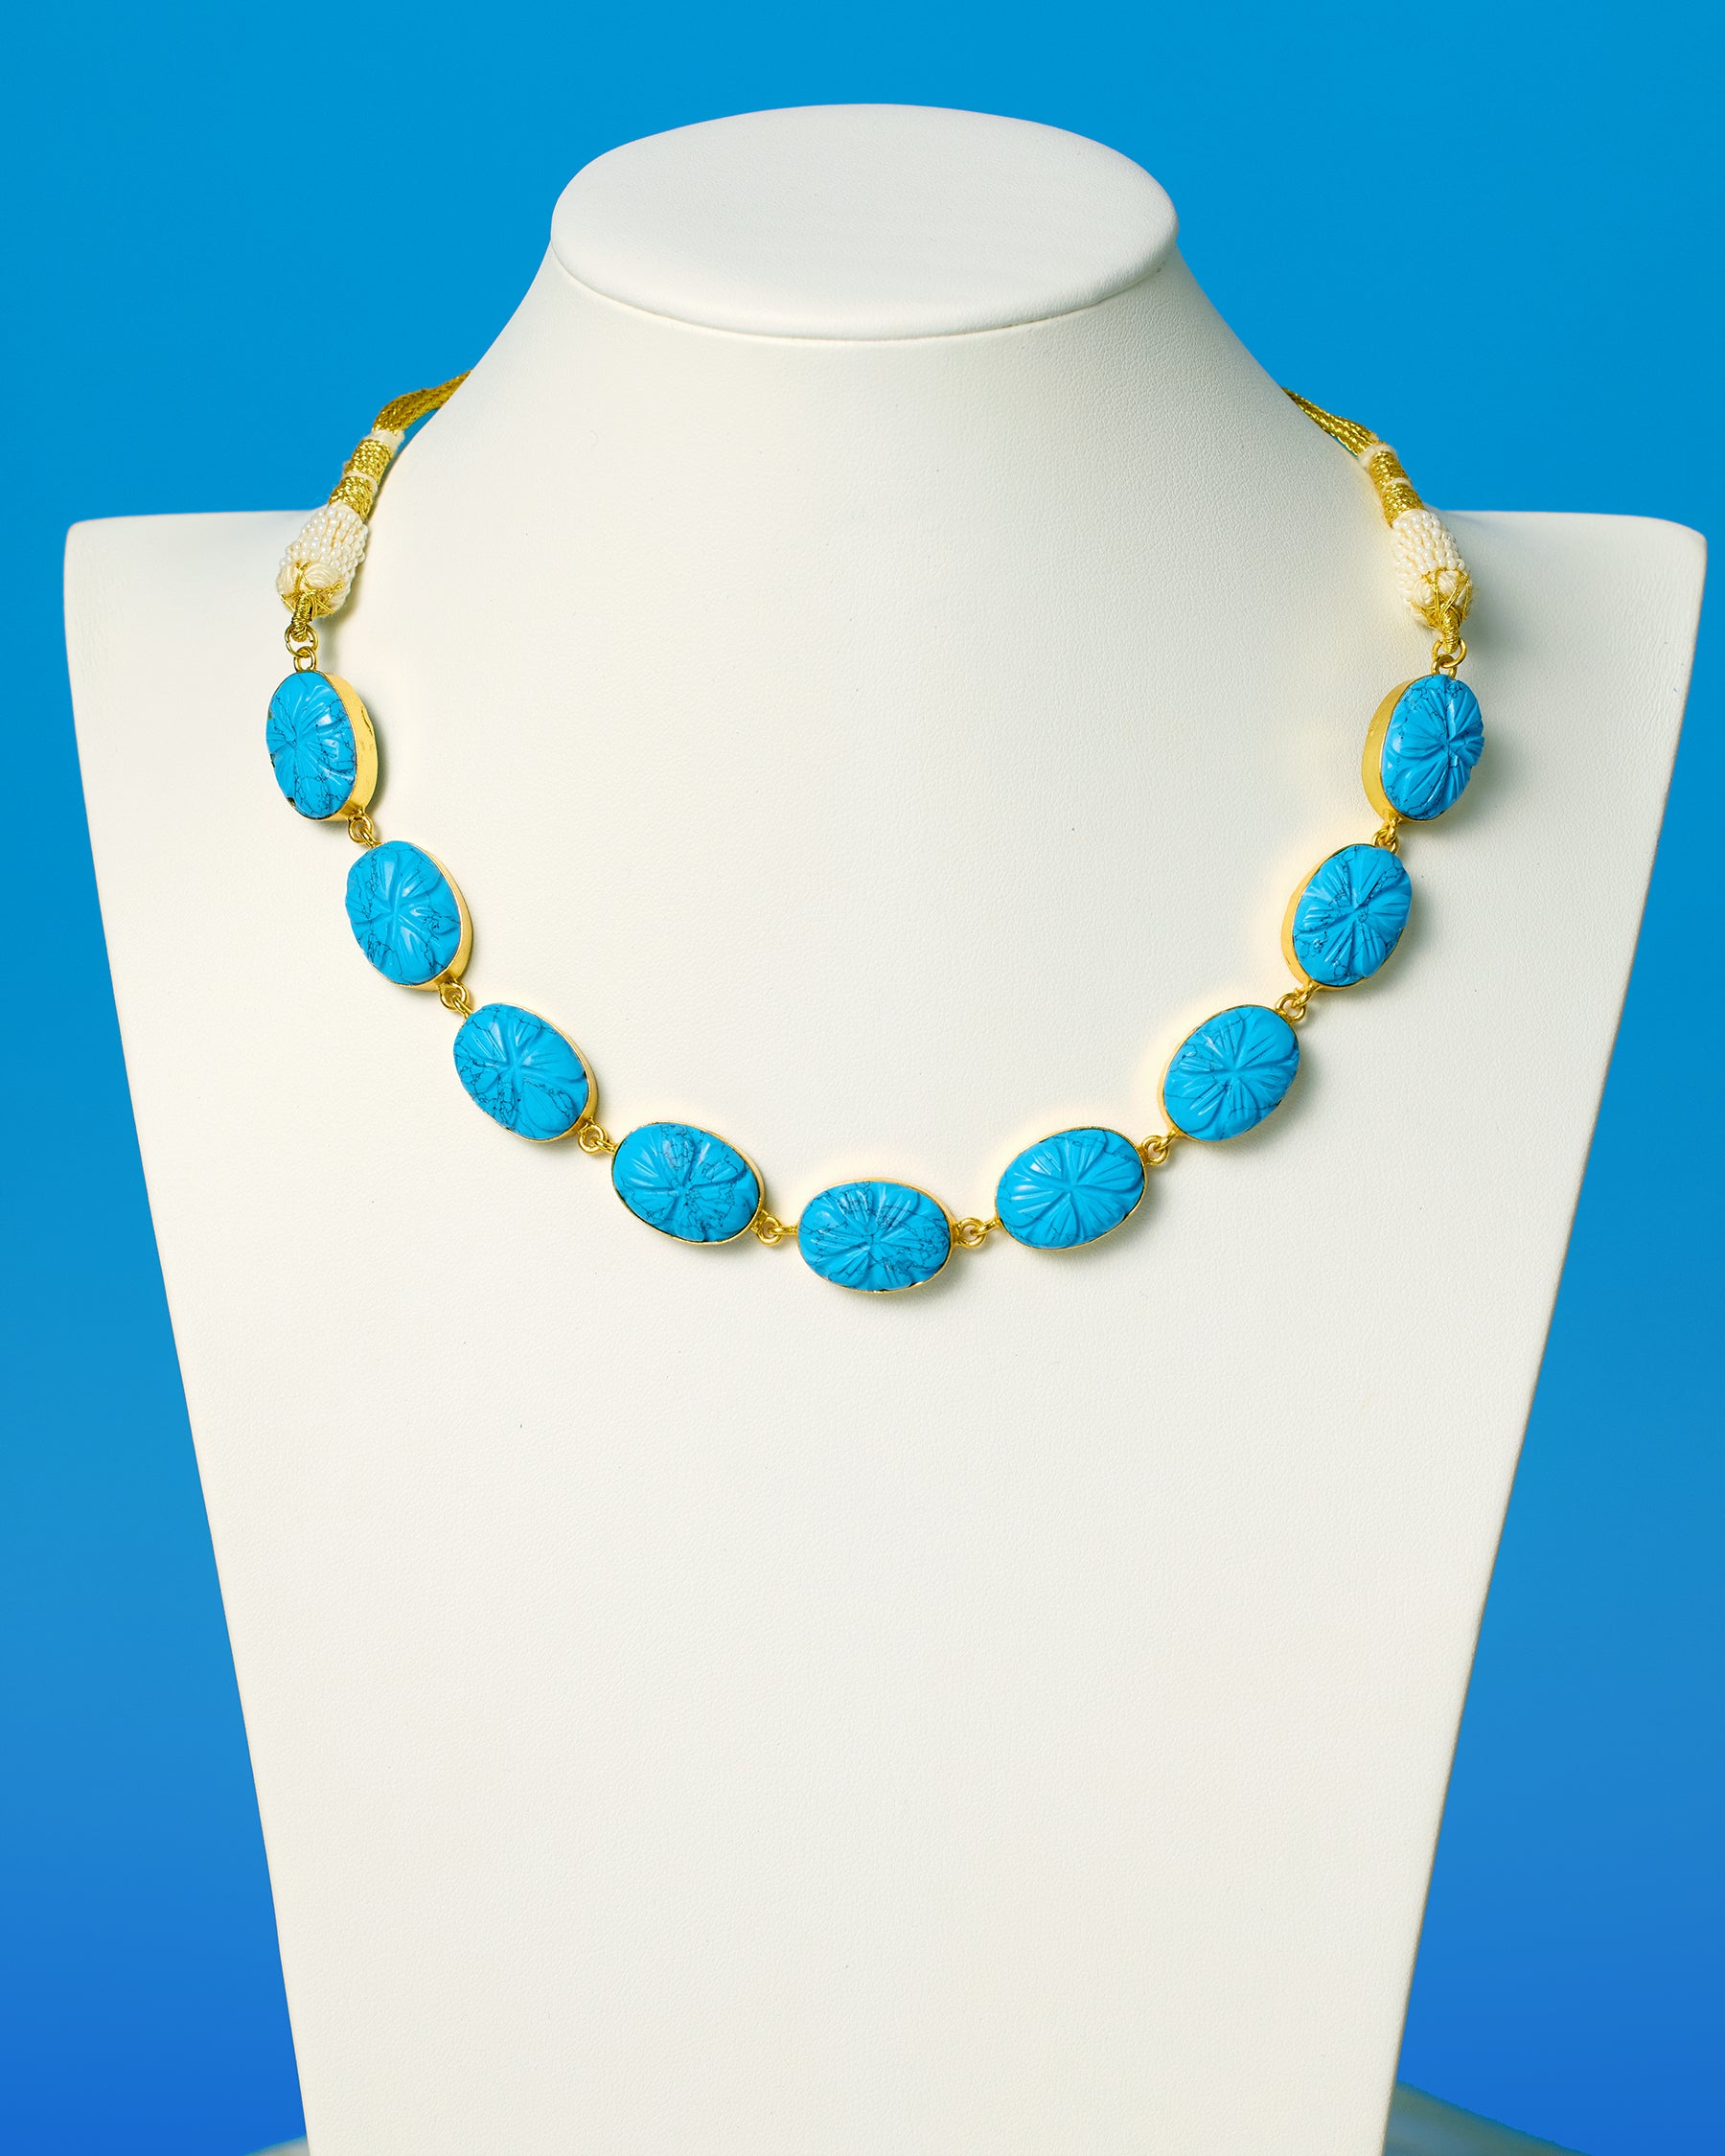 Skye Necklace in Turquoise Colored Stone